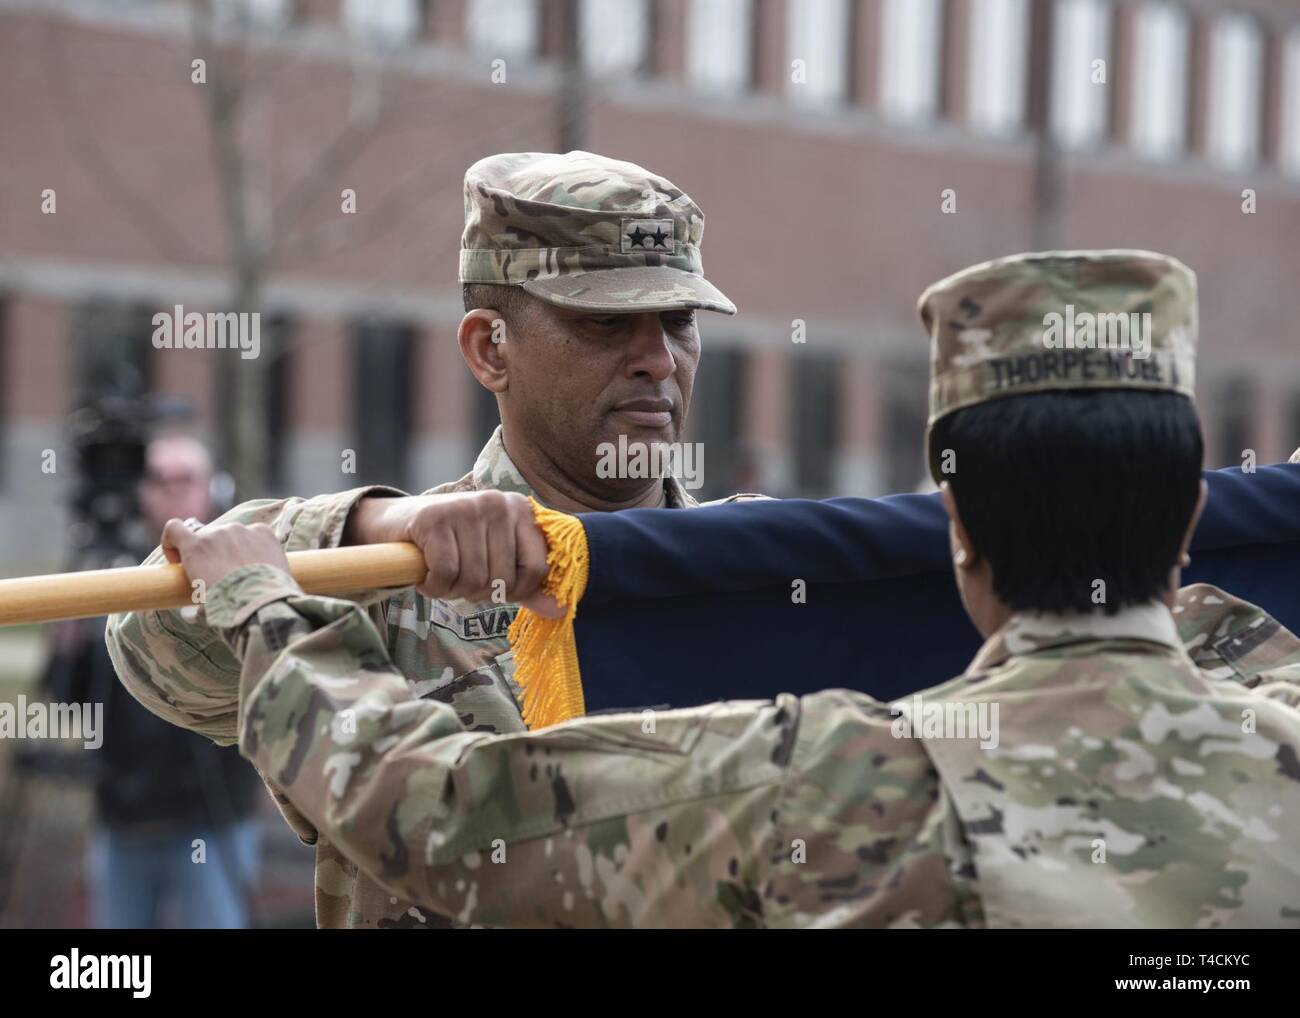 Maj. Gen. Jason T. Evans, U.S. Army Human Resources Command commanding general, unfurls the HRC unit colors during a repatching ceremony held at the Lt. Gen. Timothy J. Maude complex located on Fort Knox, Ky., March 20, 2019. Nearly 18 months prior, the Army designated HRC as a direct reporting unit to HQDA G1. As a DRU, HRC provides the distribution and strategic talent management of active and reserve component Soldiers and executes personnel-related programs and services Army-wide to ensure readiness and strengthen an agile and adaptive Army. Stock Photo